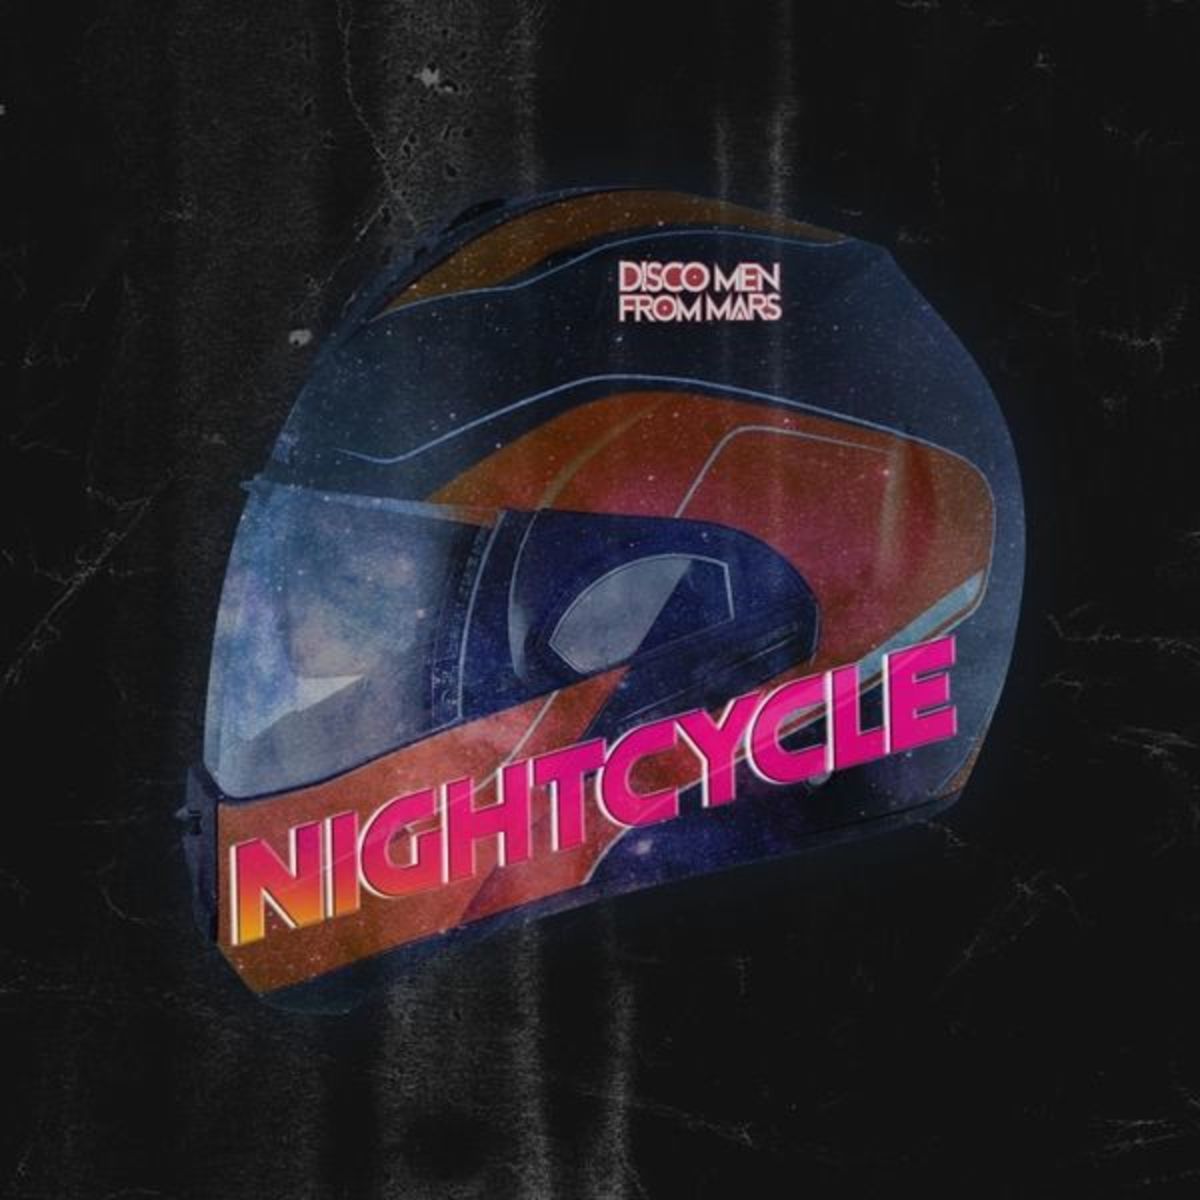 synth-ep-review-nightcycle-by-disco-men-from-mars